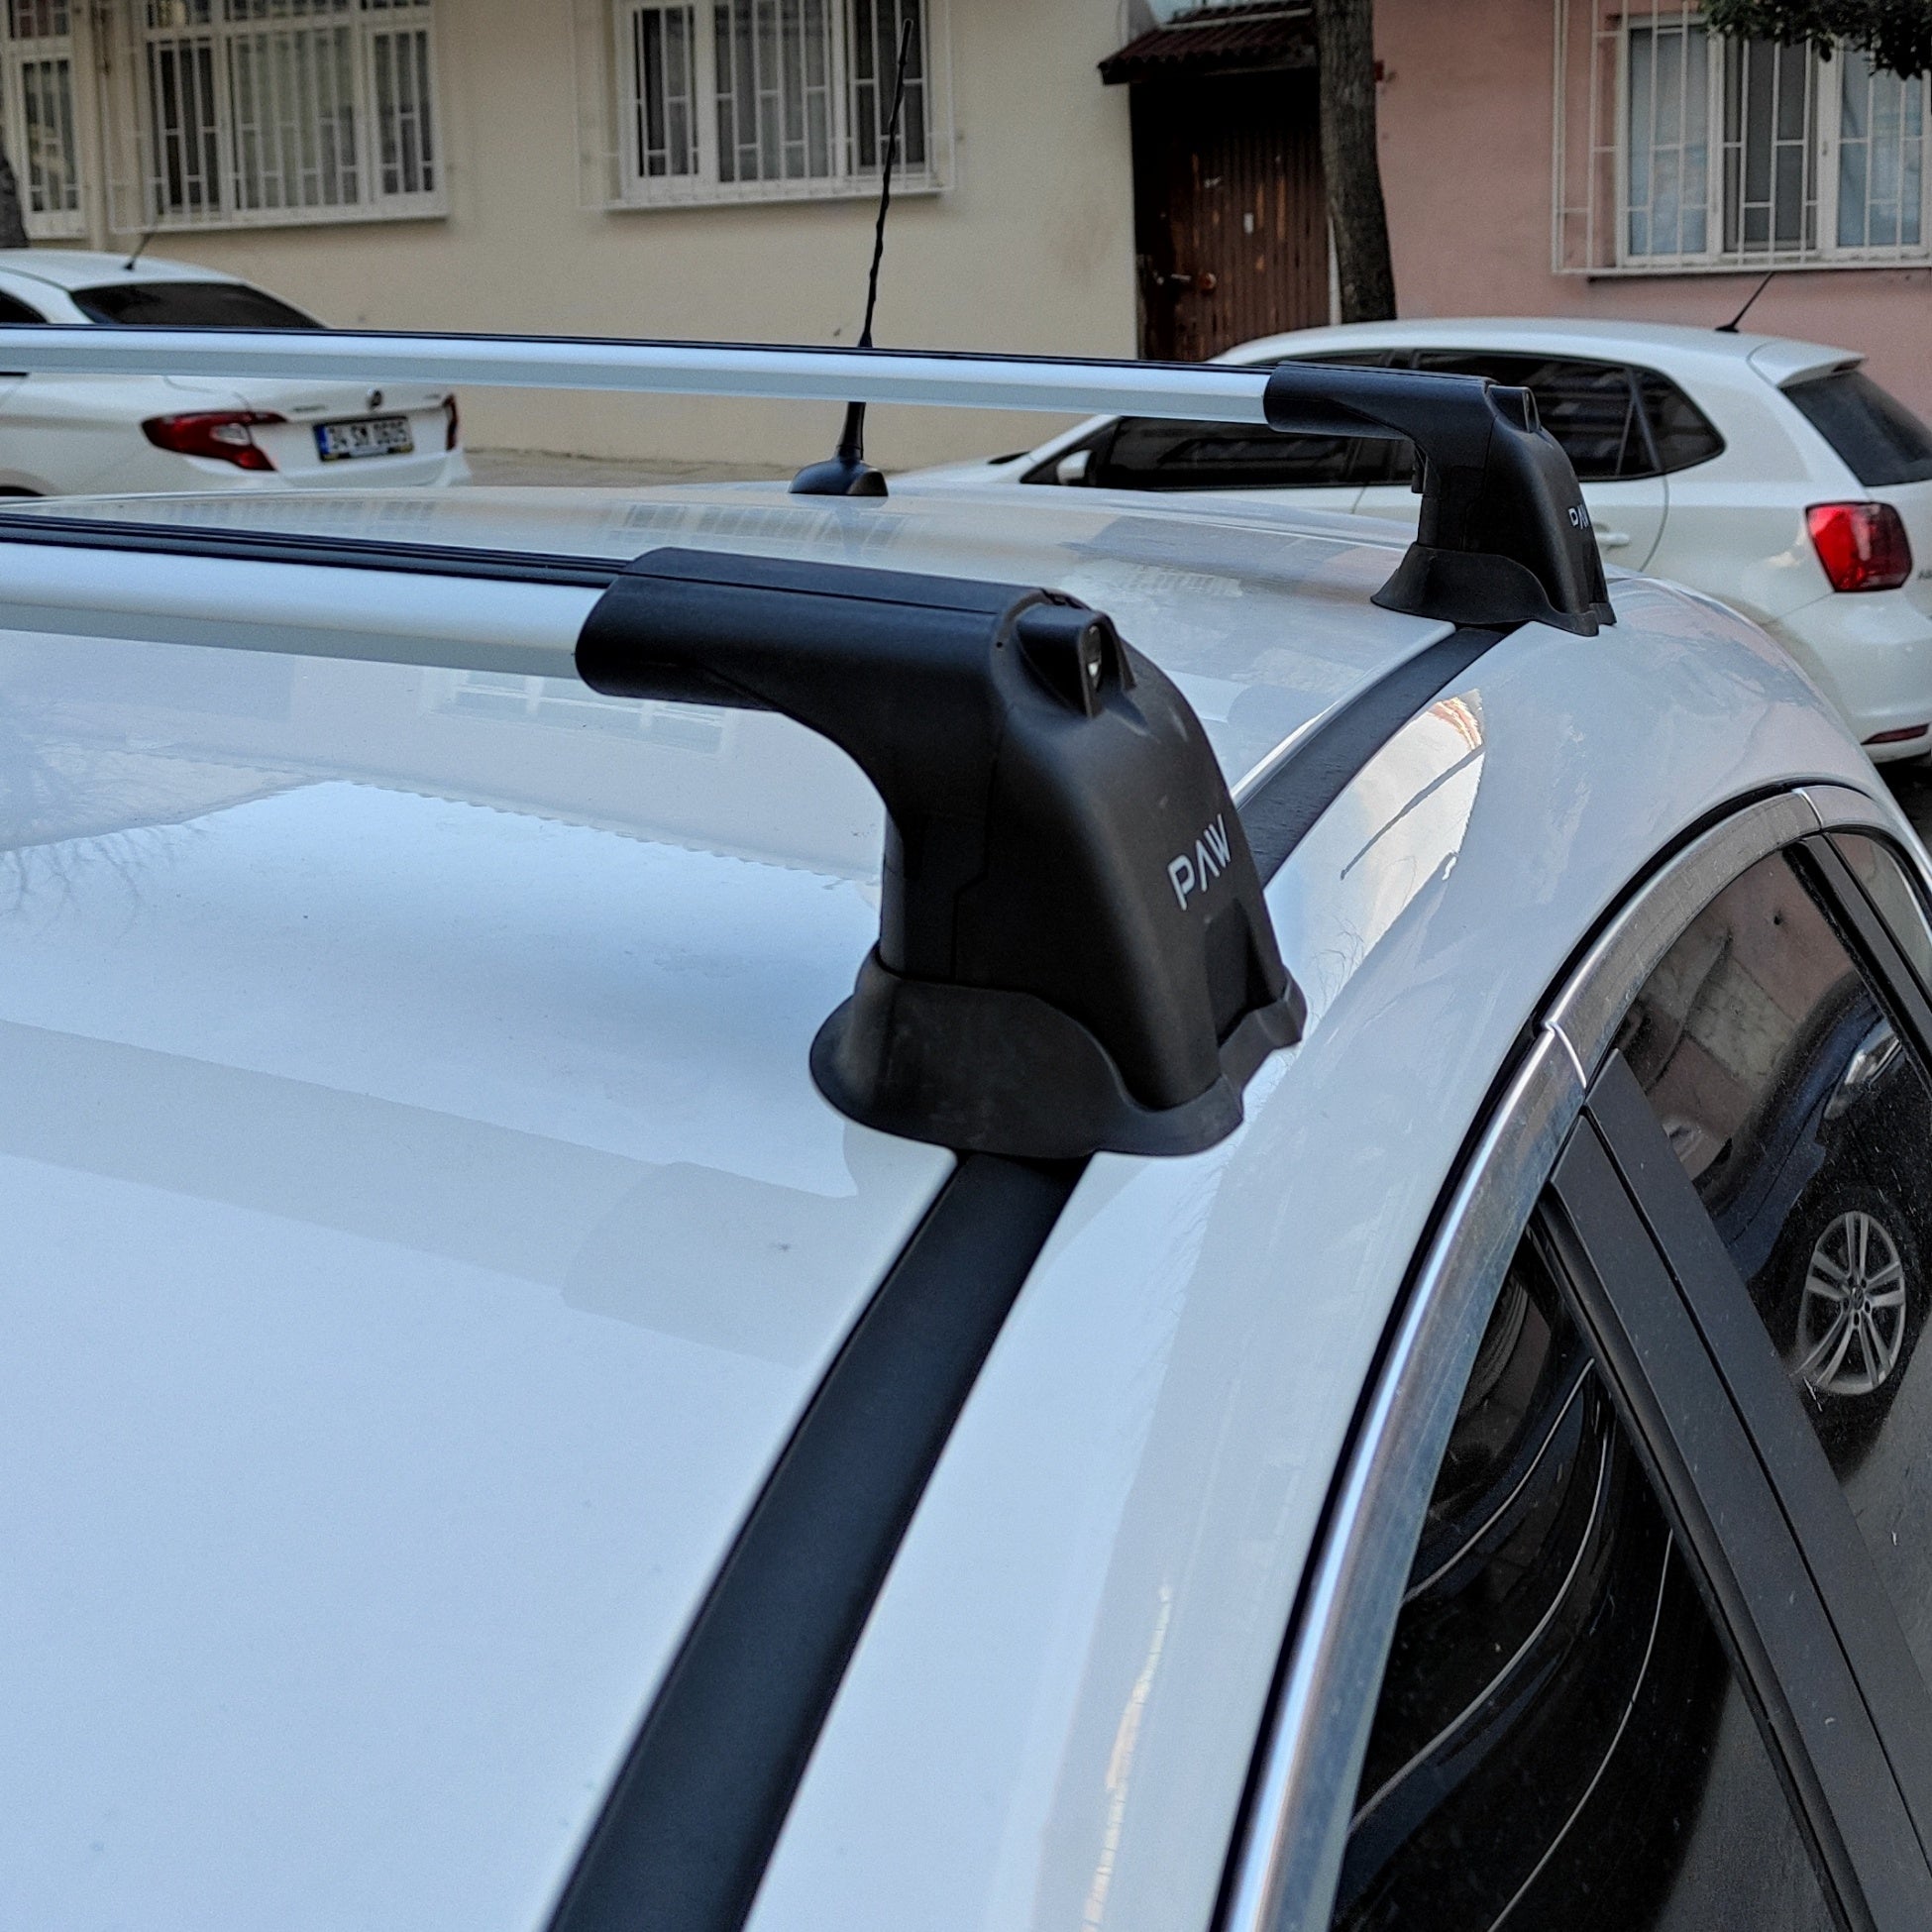 For Opel&Vauxhall Astra J 2010-2015 Roof Rack System Carrier Cross Bars Aluminum Lockable High Quality of Metal Bracket Black-4